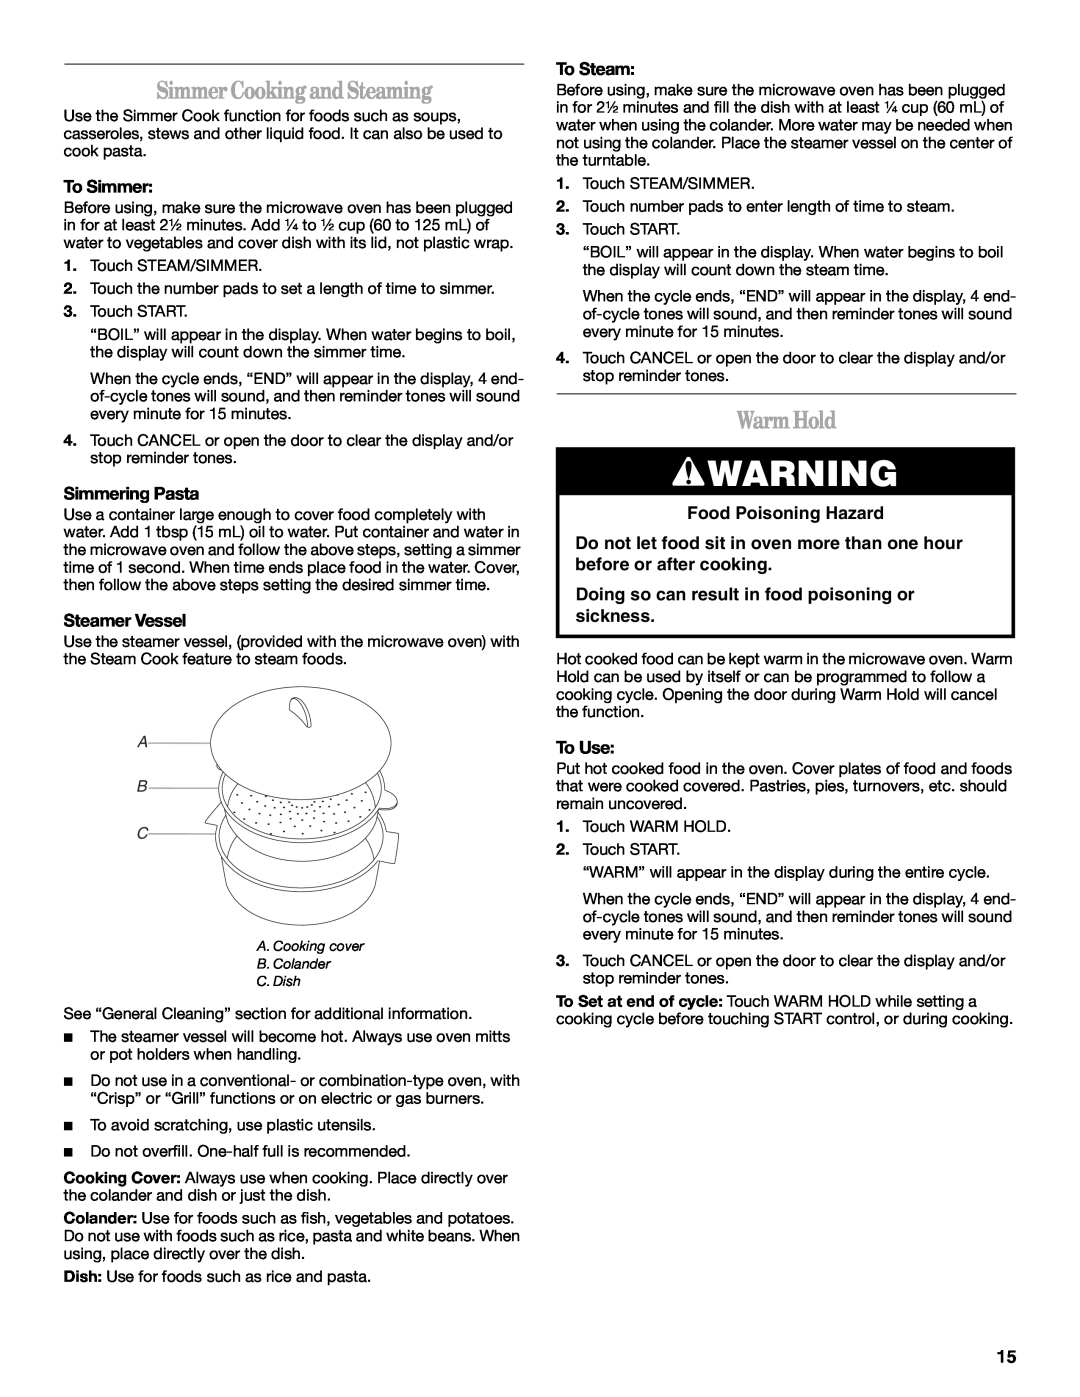 Whirlpool GH5176XP manual Simmer Cooking and Steaming, Warm Hold, Food Poisoning Hazard, A B C 